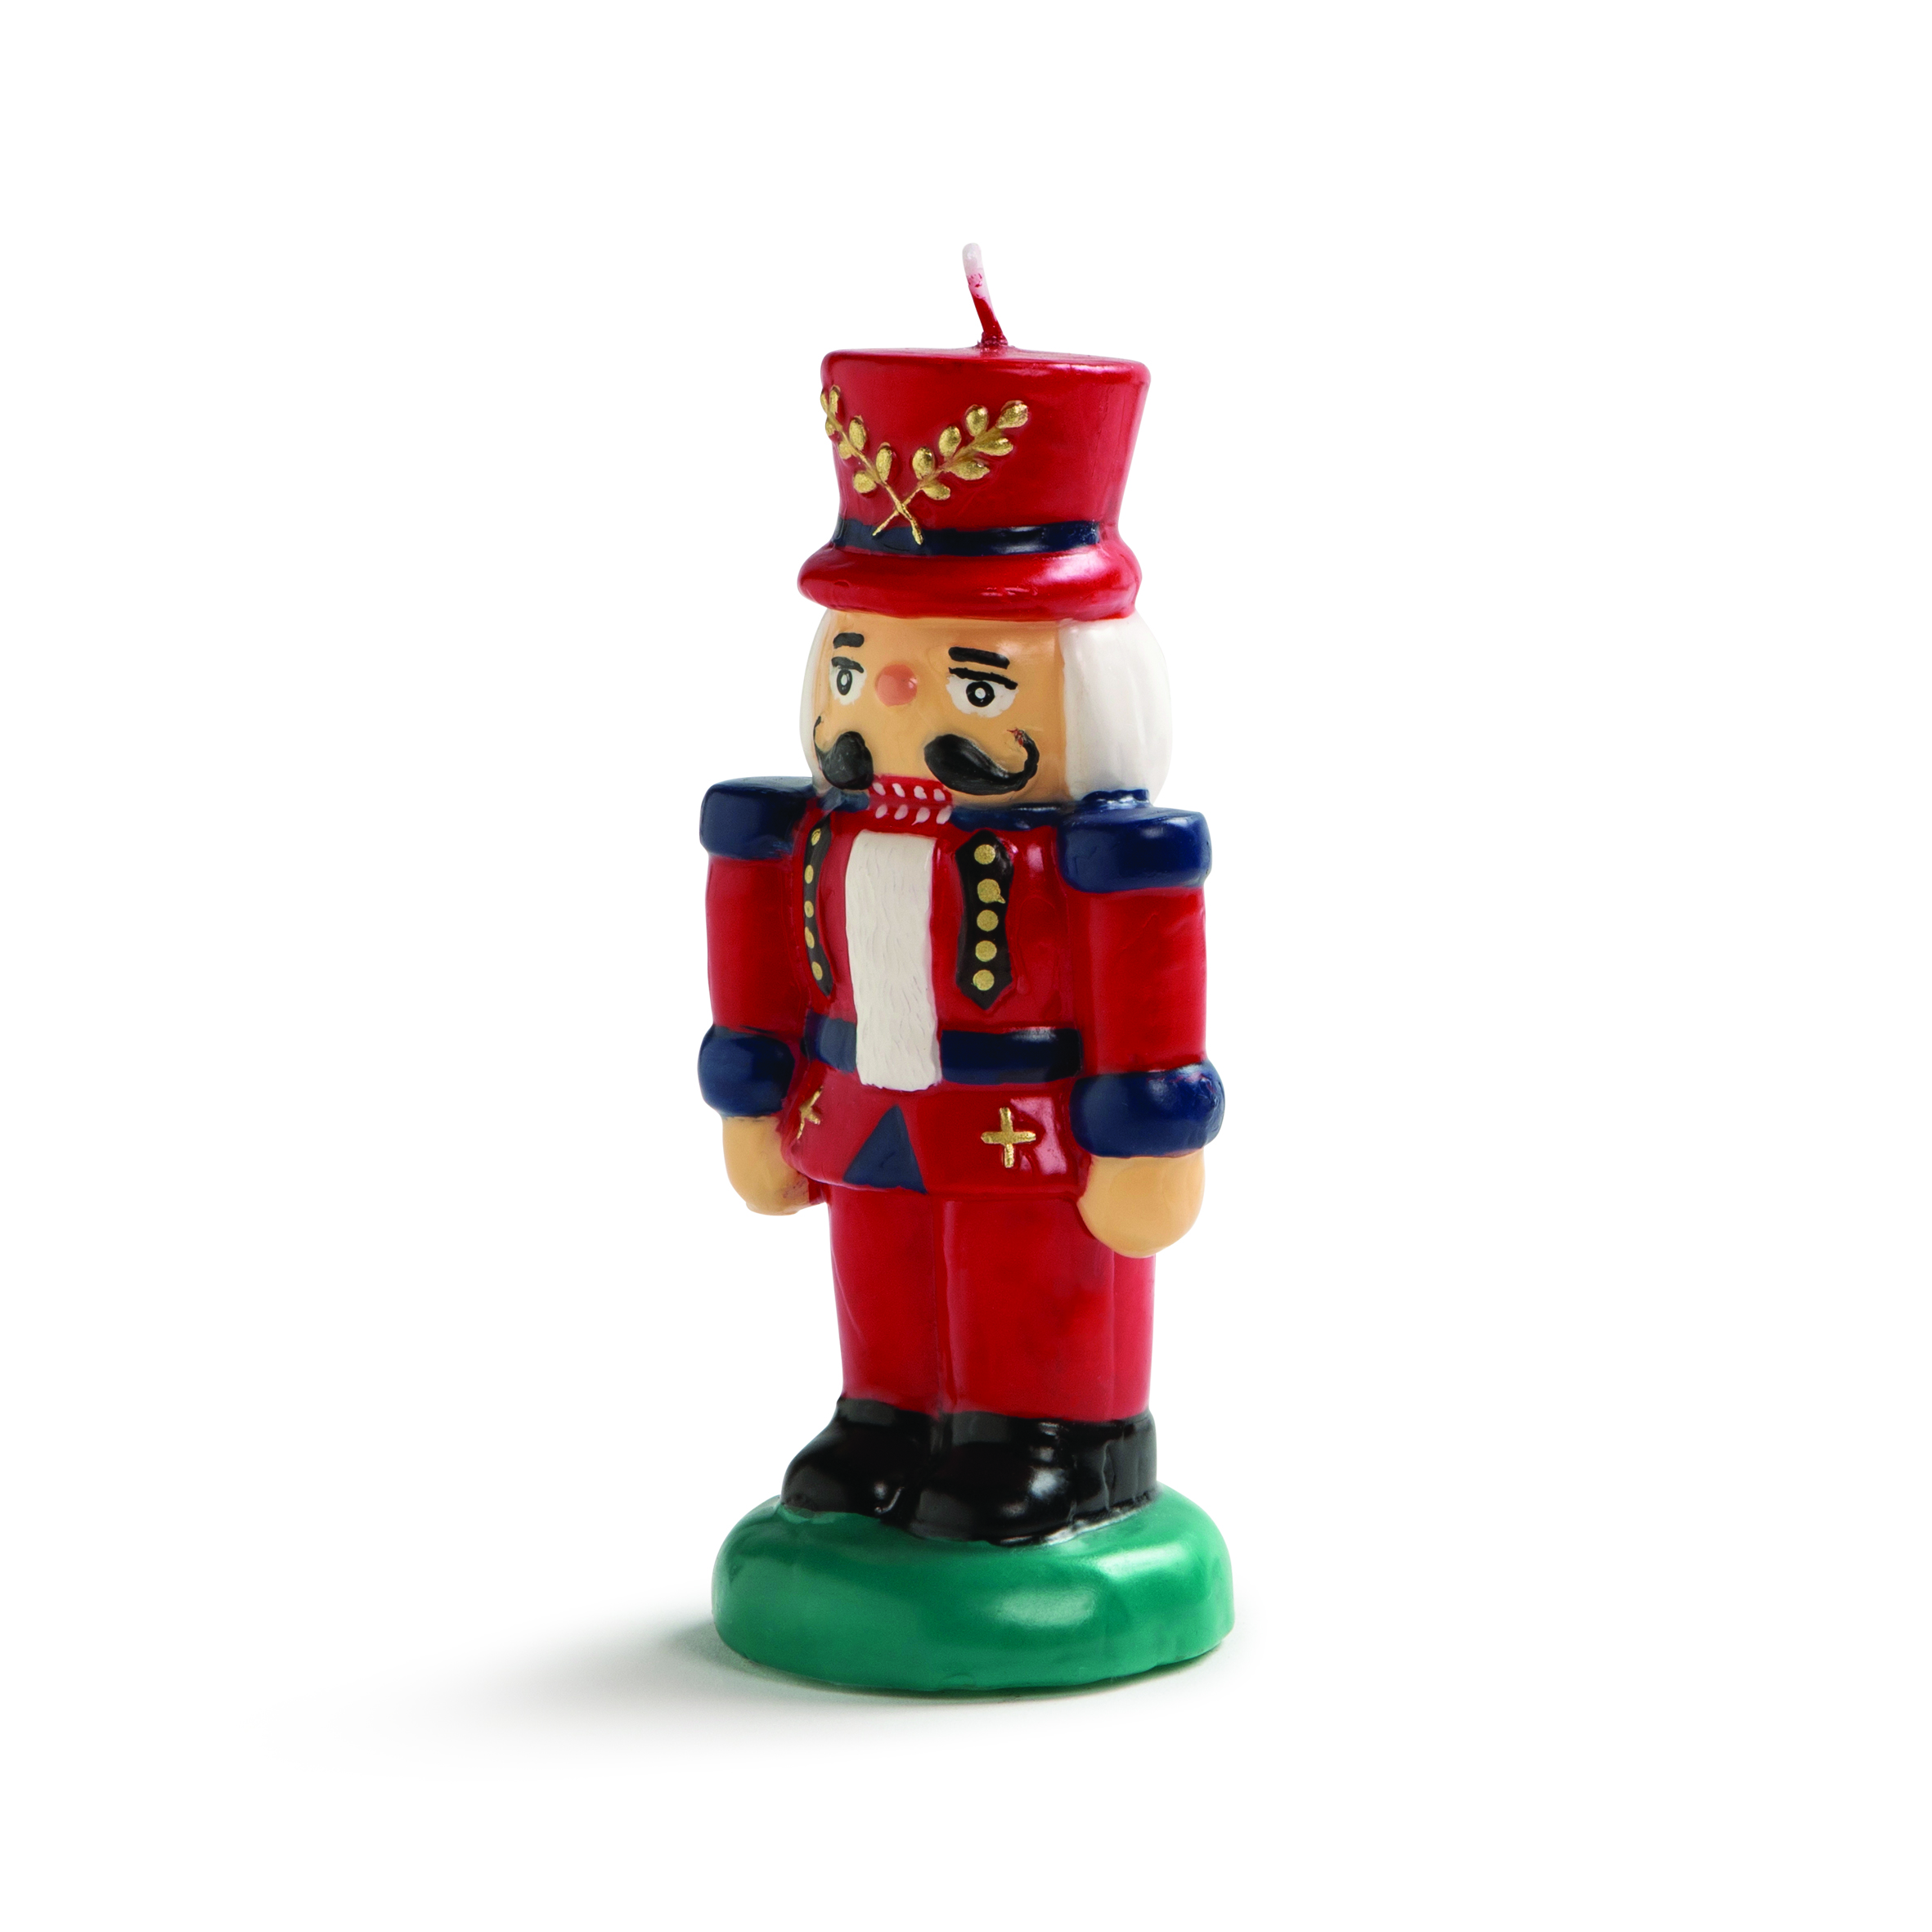 &klevering Nutcracker Candle in Red